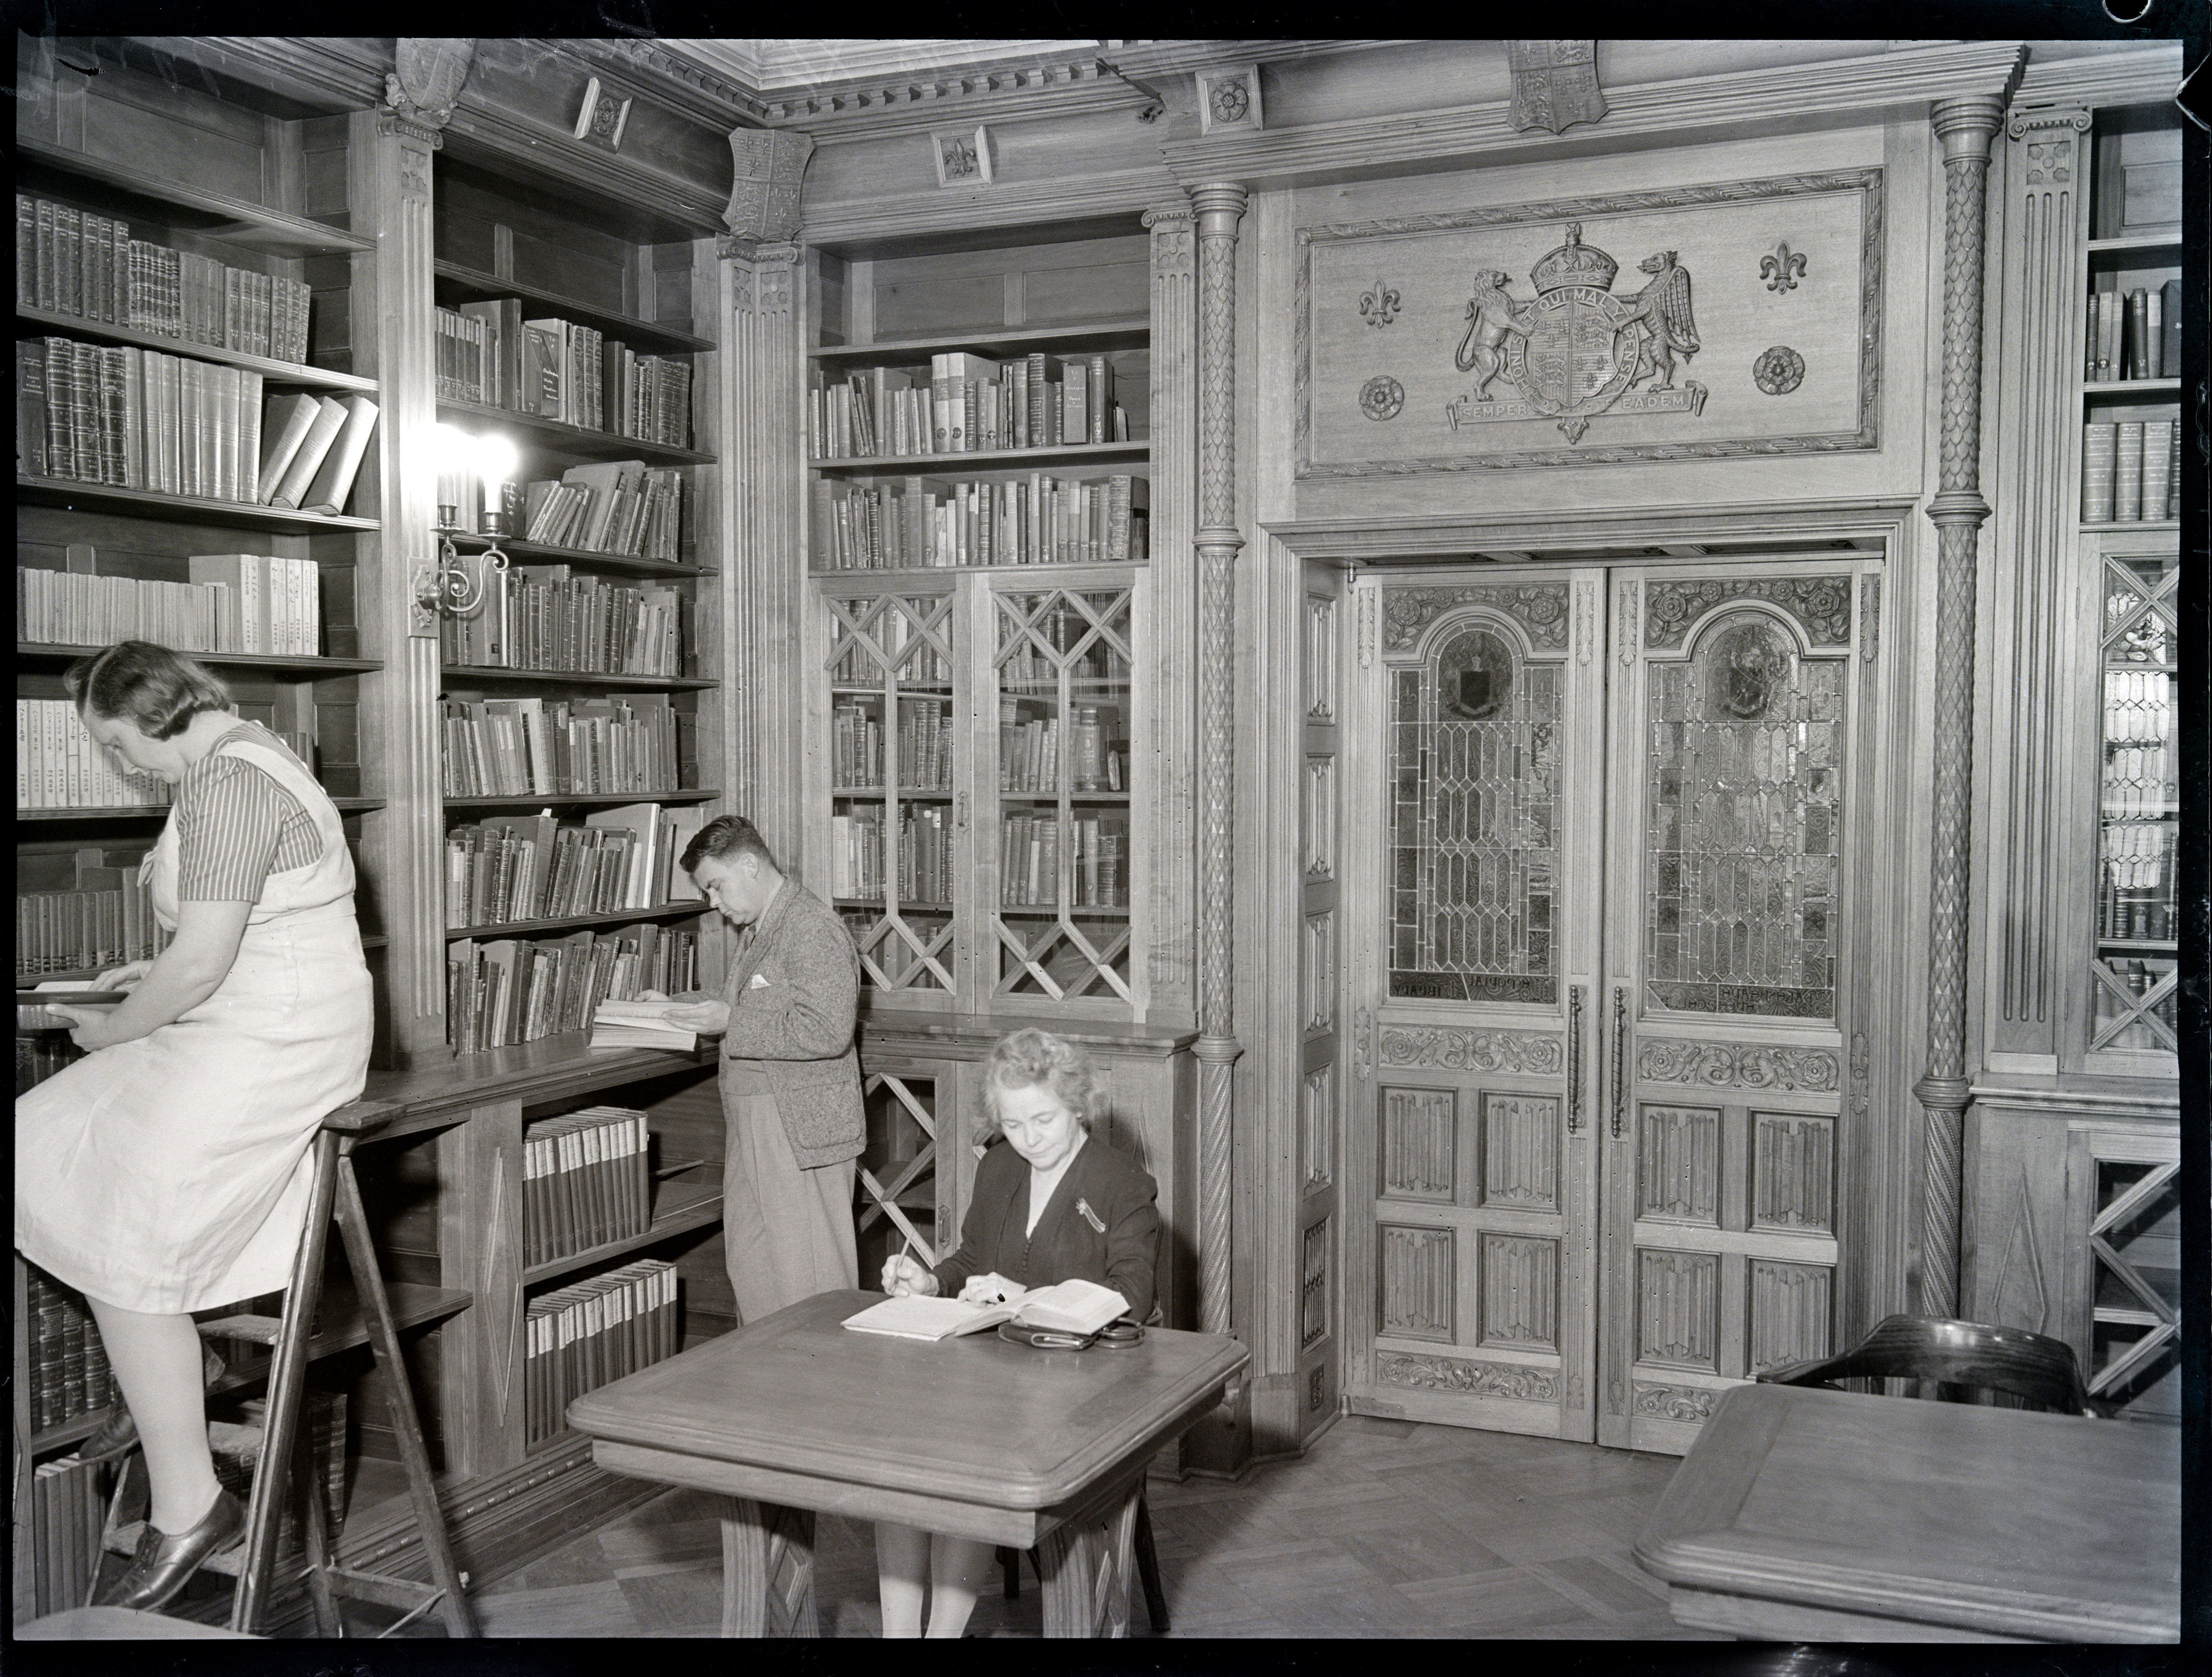 Shakespeare Room, Mitchell Building, photograph by Ivan Ives, 29.10.1943, Pix Magazine Collection